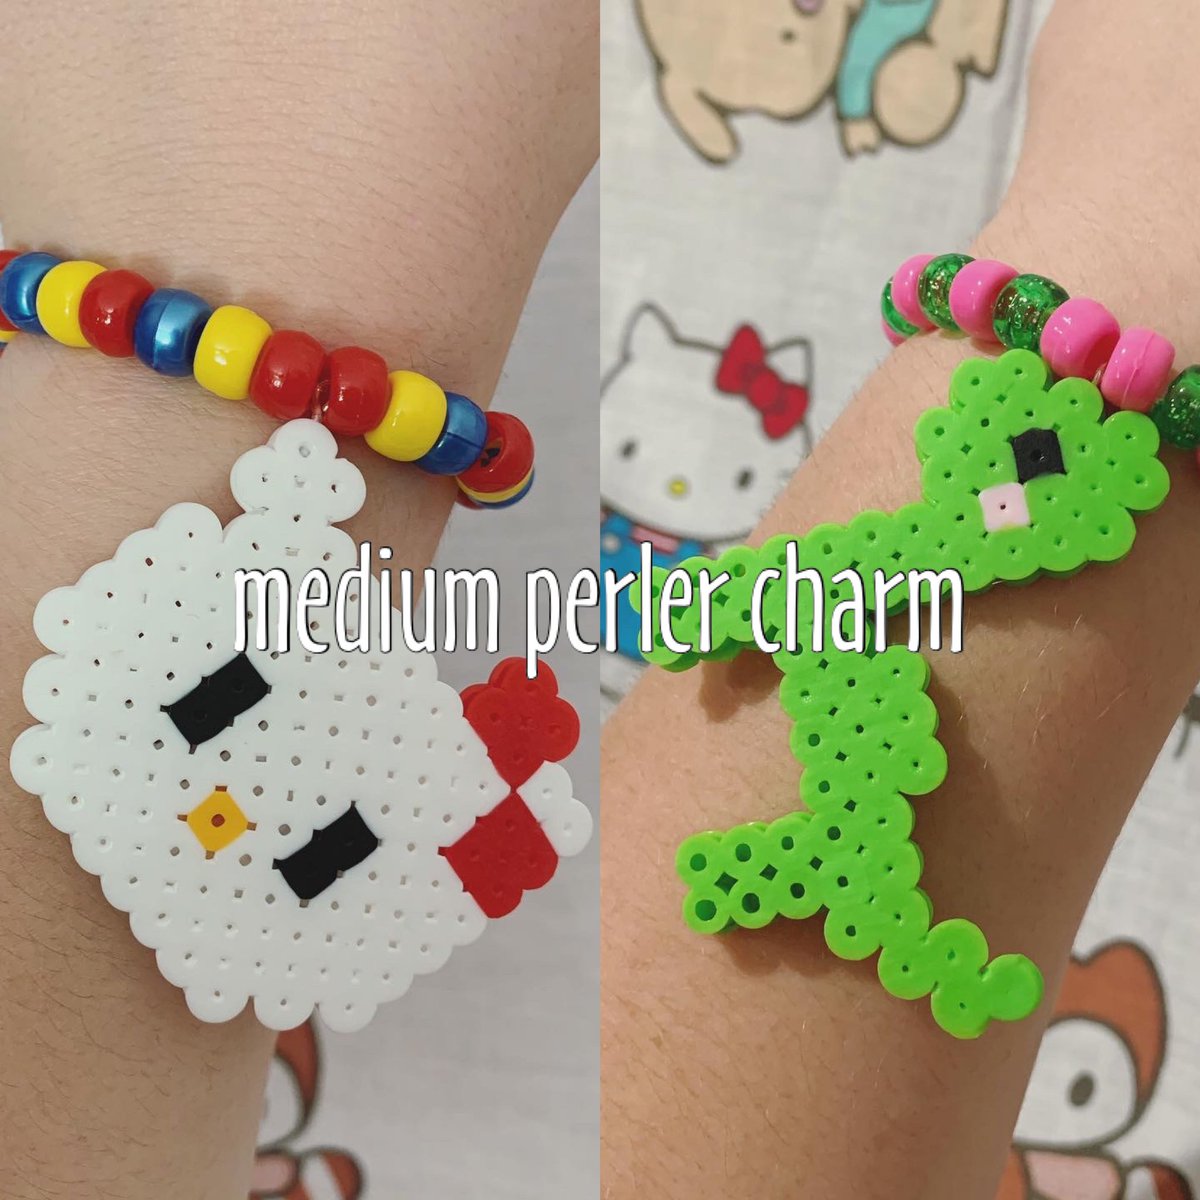 and finally, i do custom kandi outside of patreon as well! dm me for more info on that! thank you all for reading, retweeting this thread would be highly appreciated!